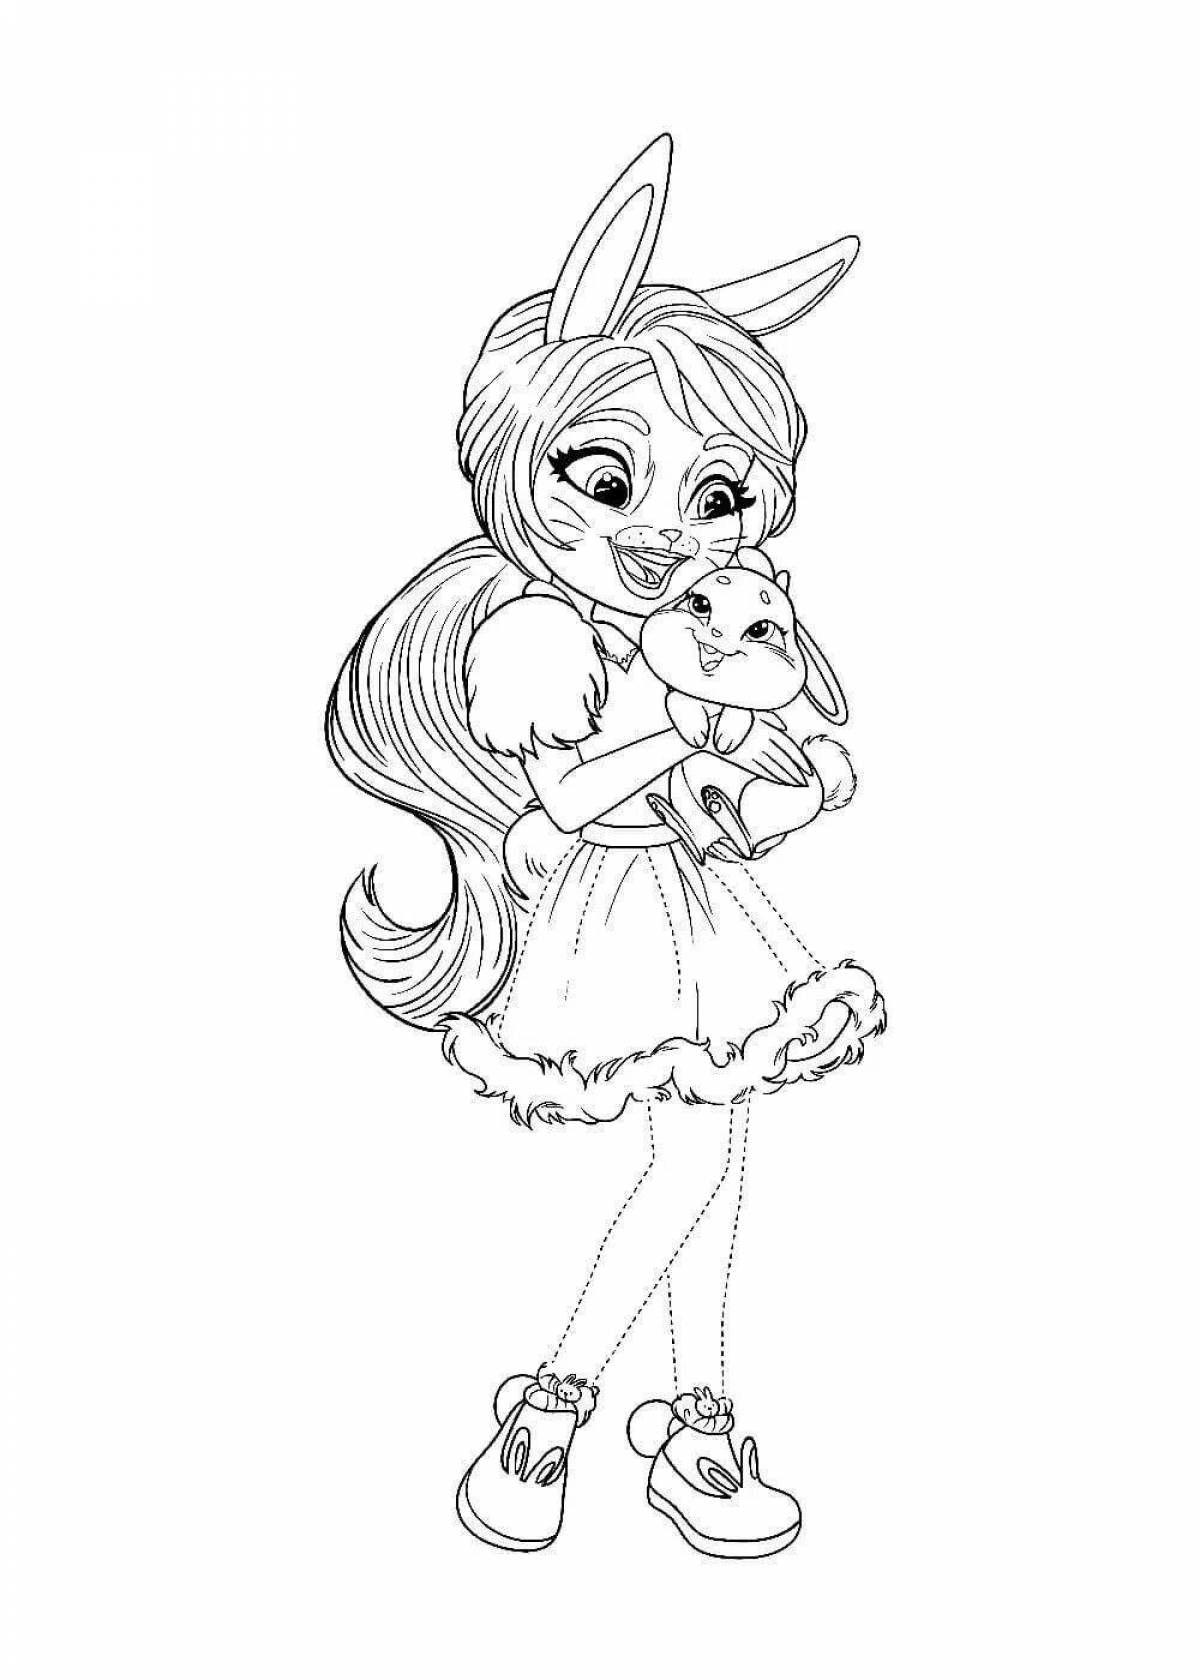 Felicity colorful coloring page